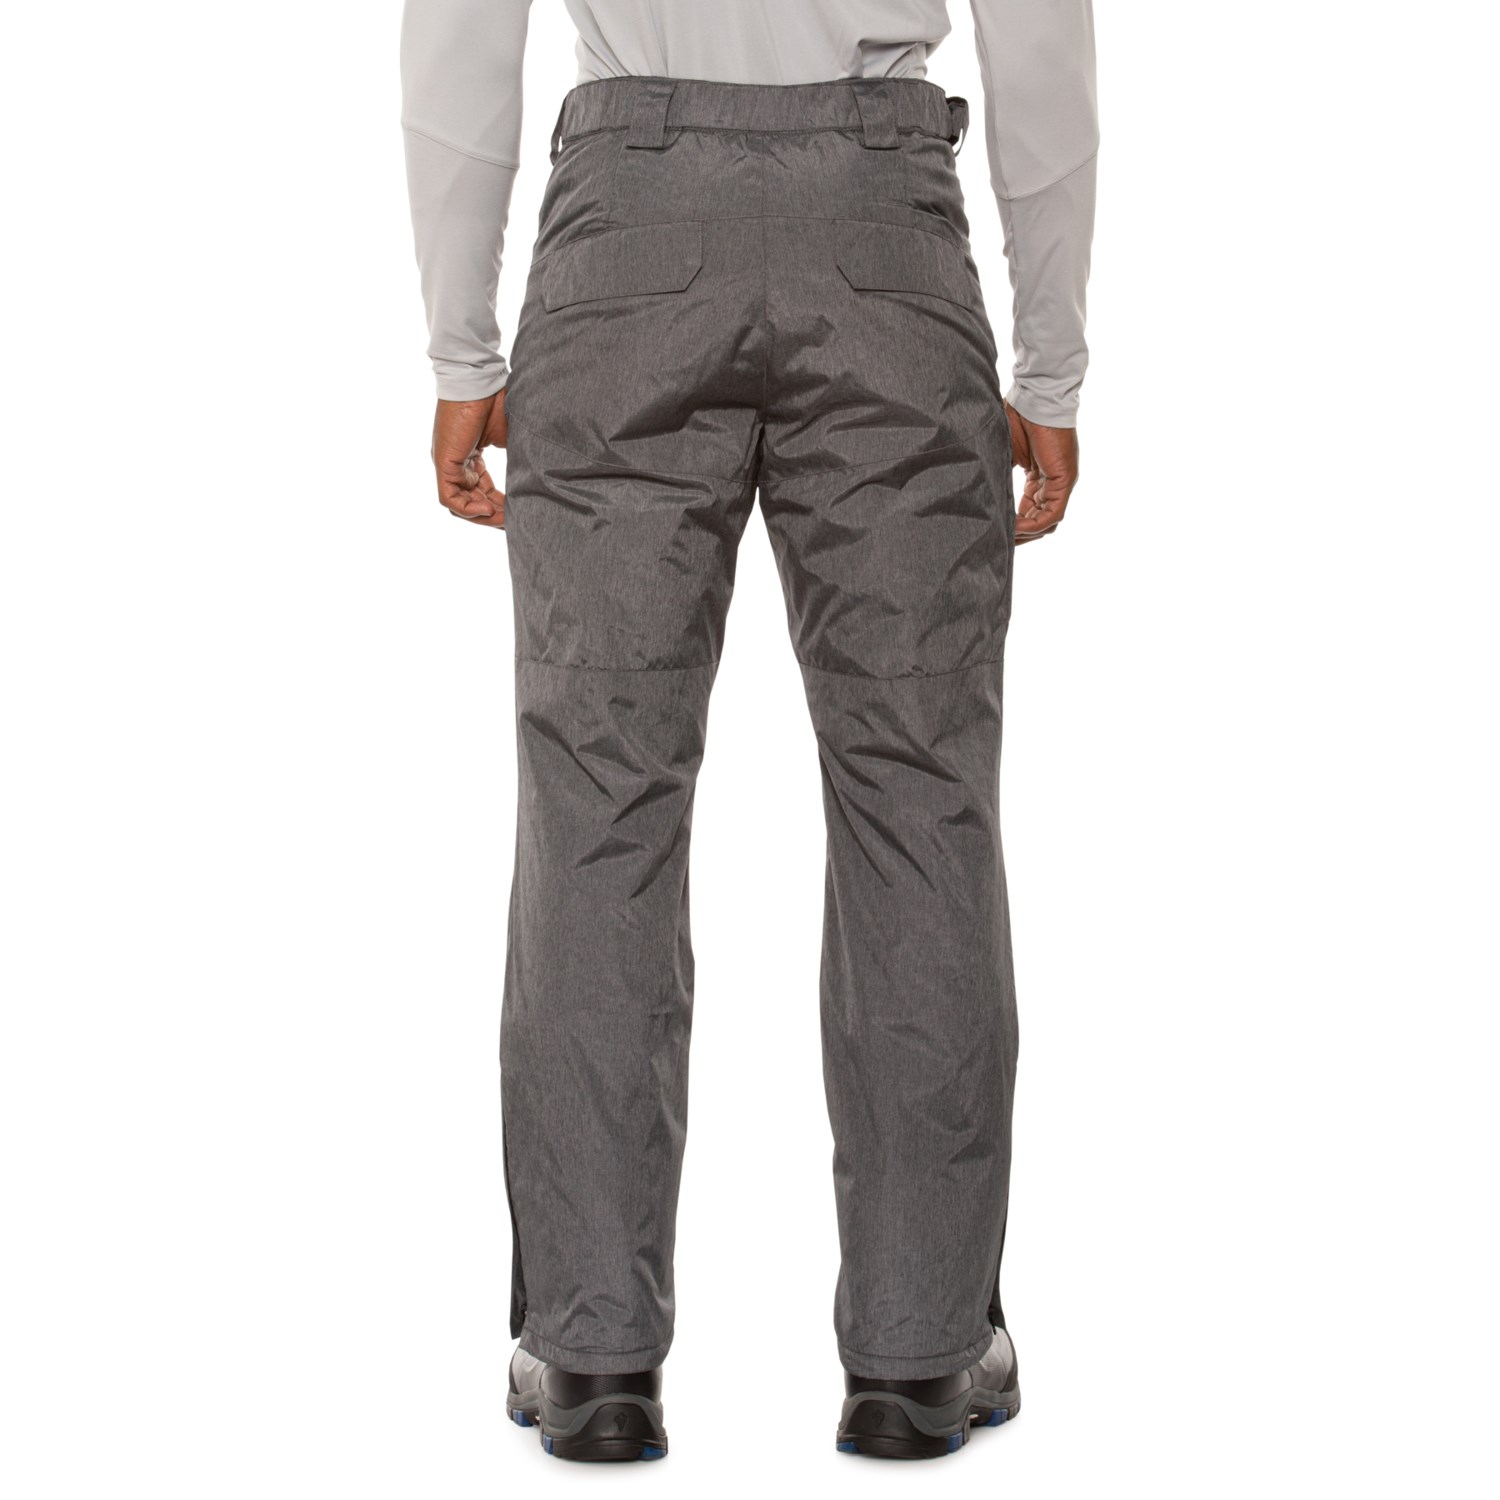 Arctic Quest Breathable Ski Pants - Waterproof, Insulated - Save 63%